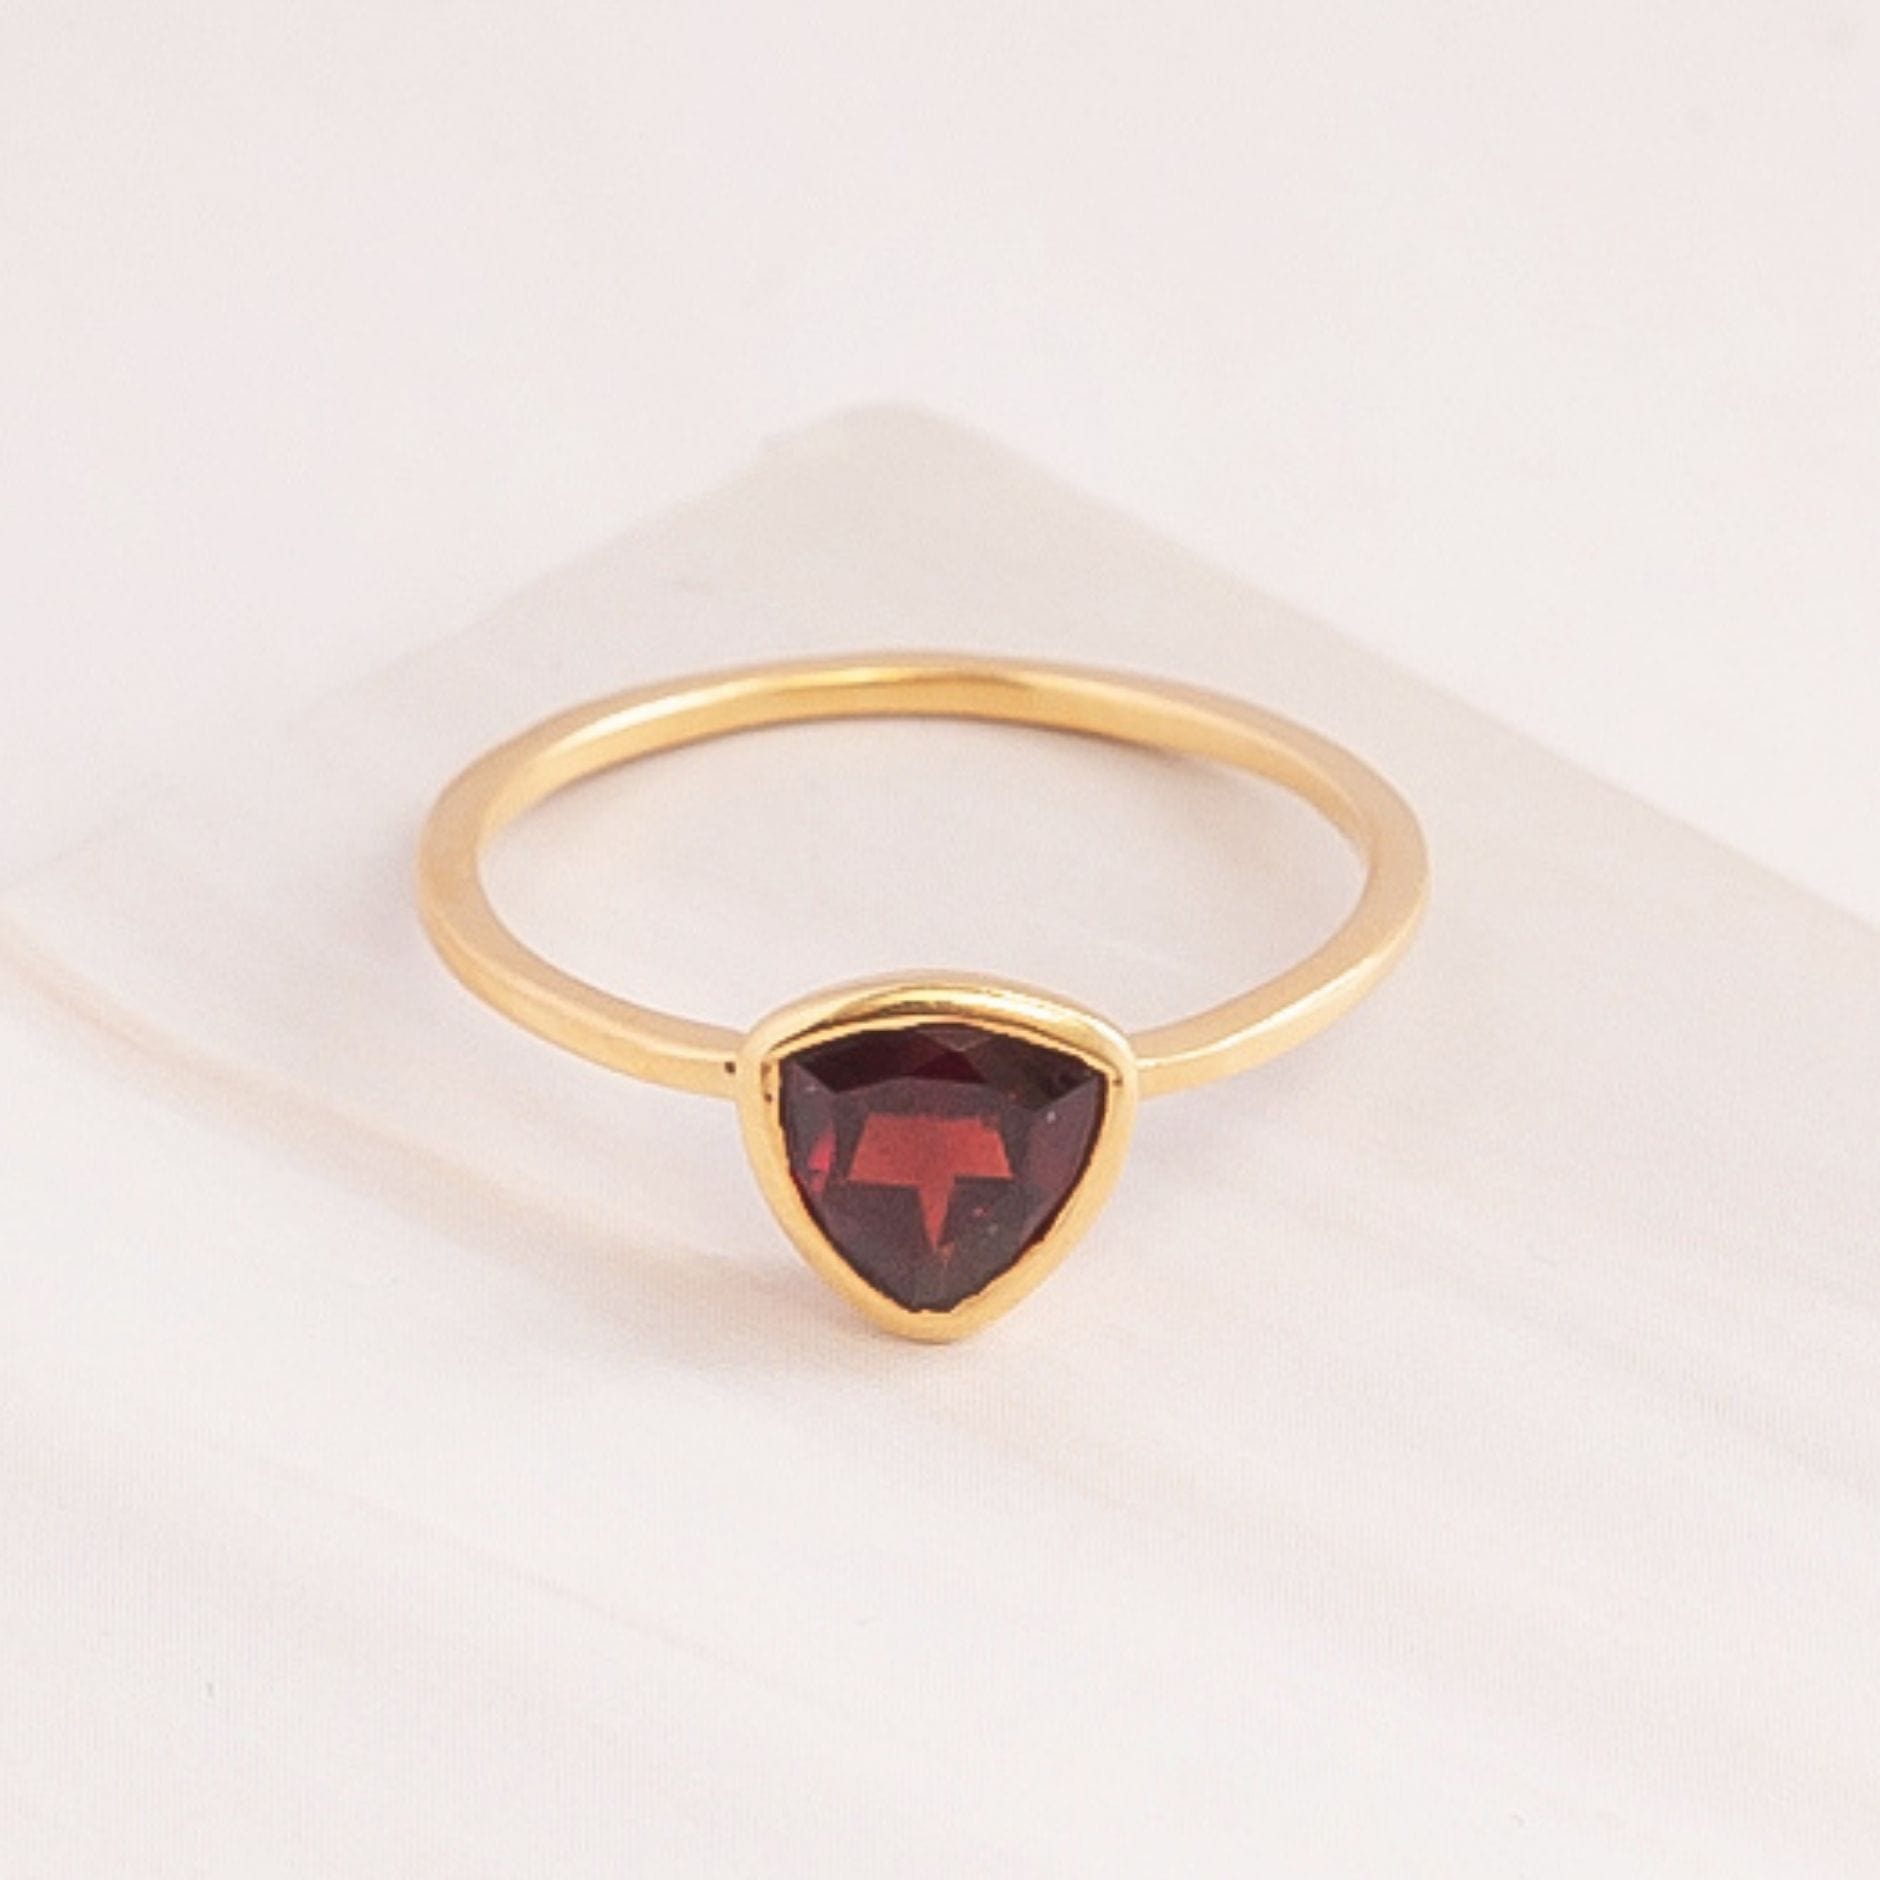 Emblem Jewelry Rings Red Garnet / Triangle Signature Candy Gemstone Stack Rings (Ring Size 9)